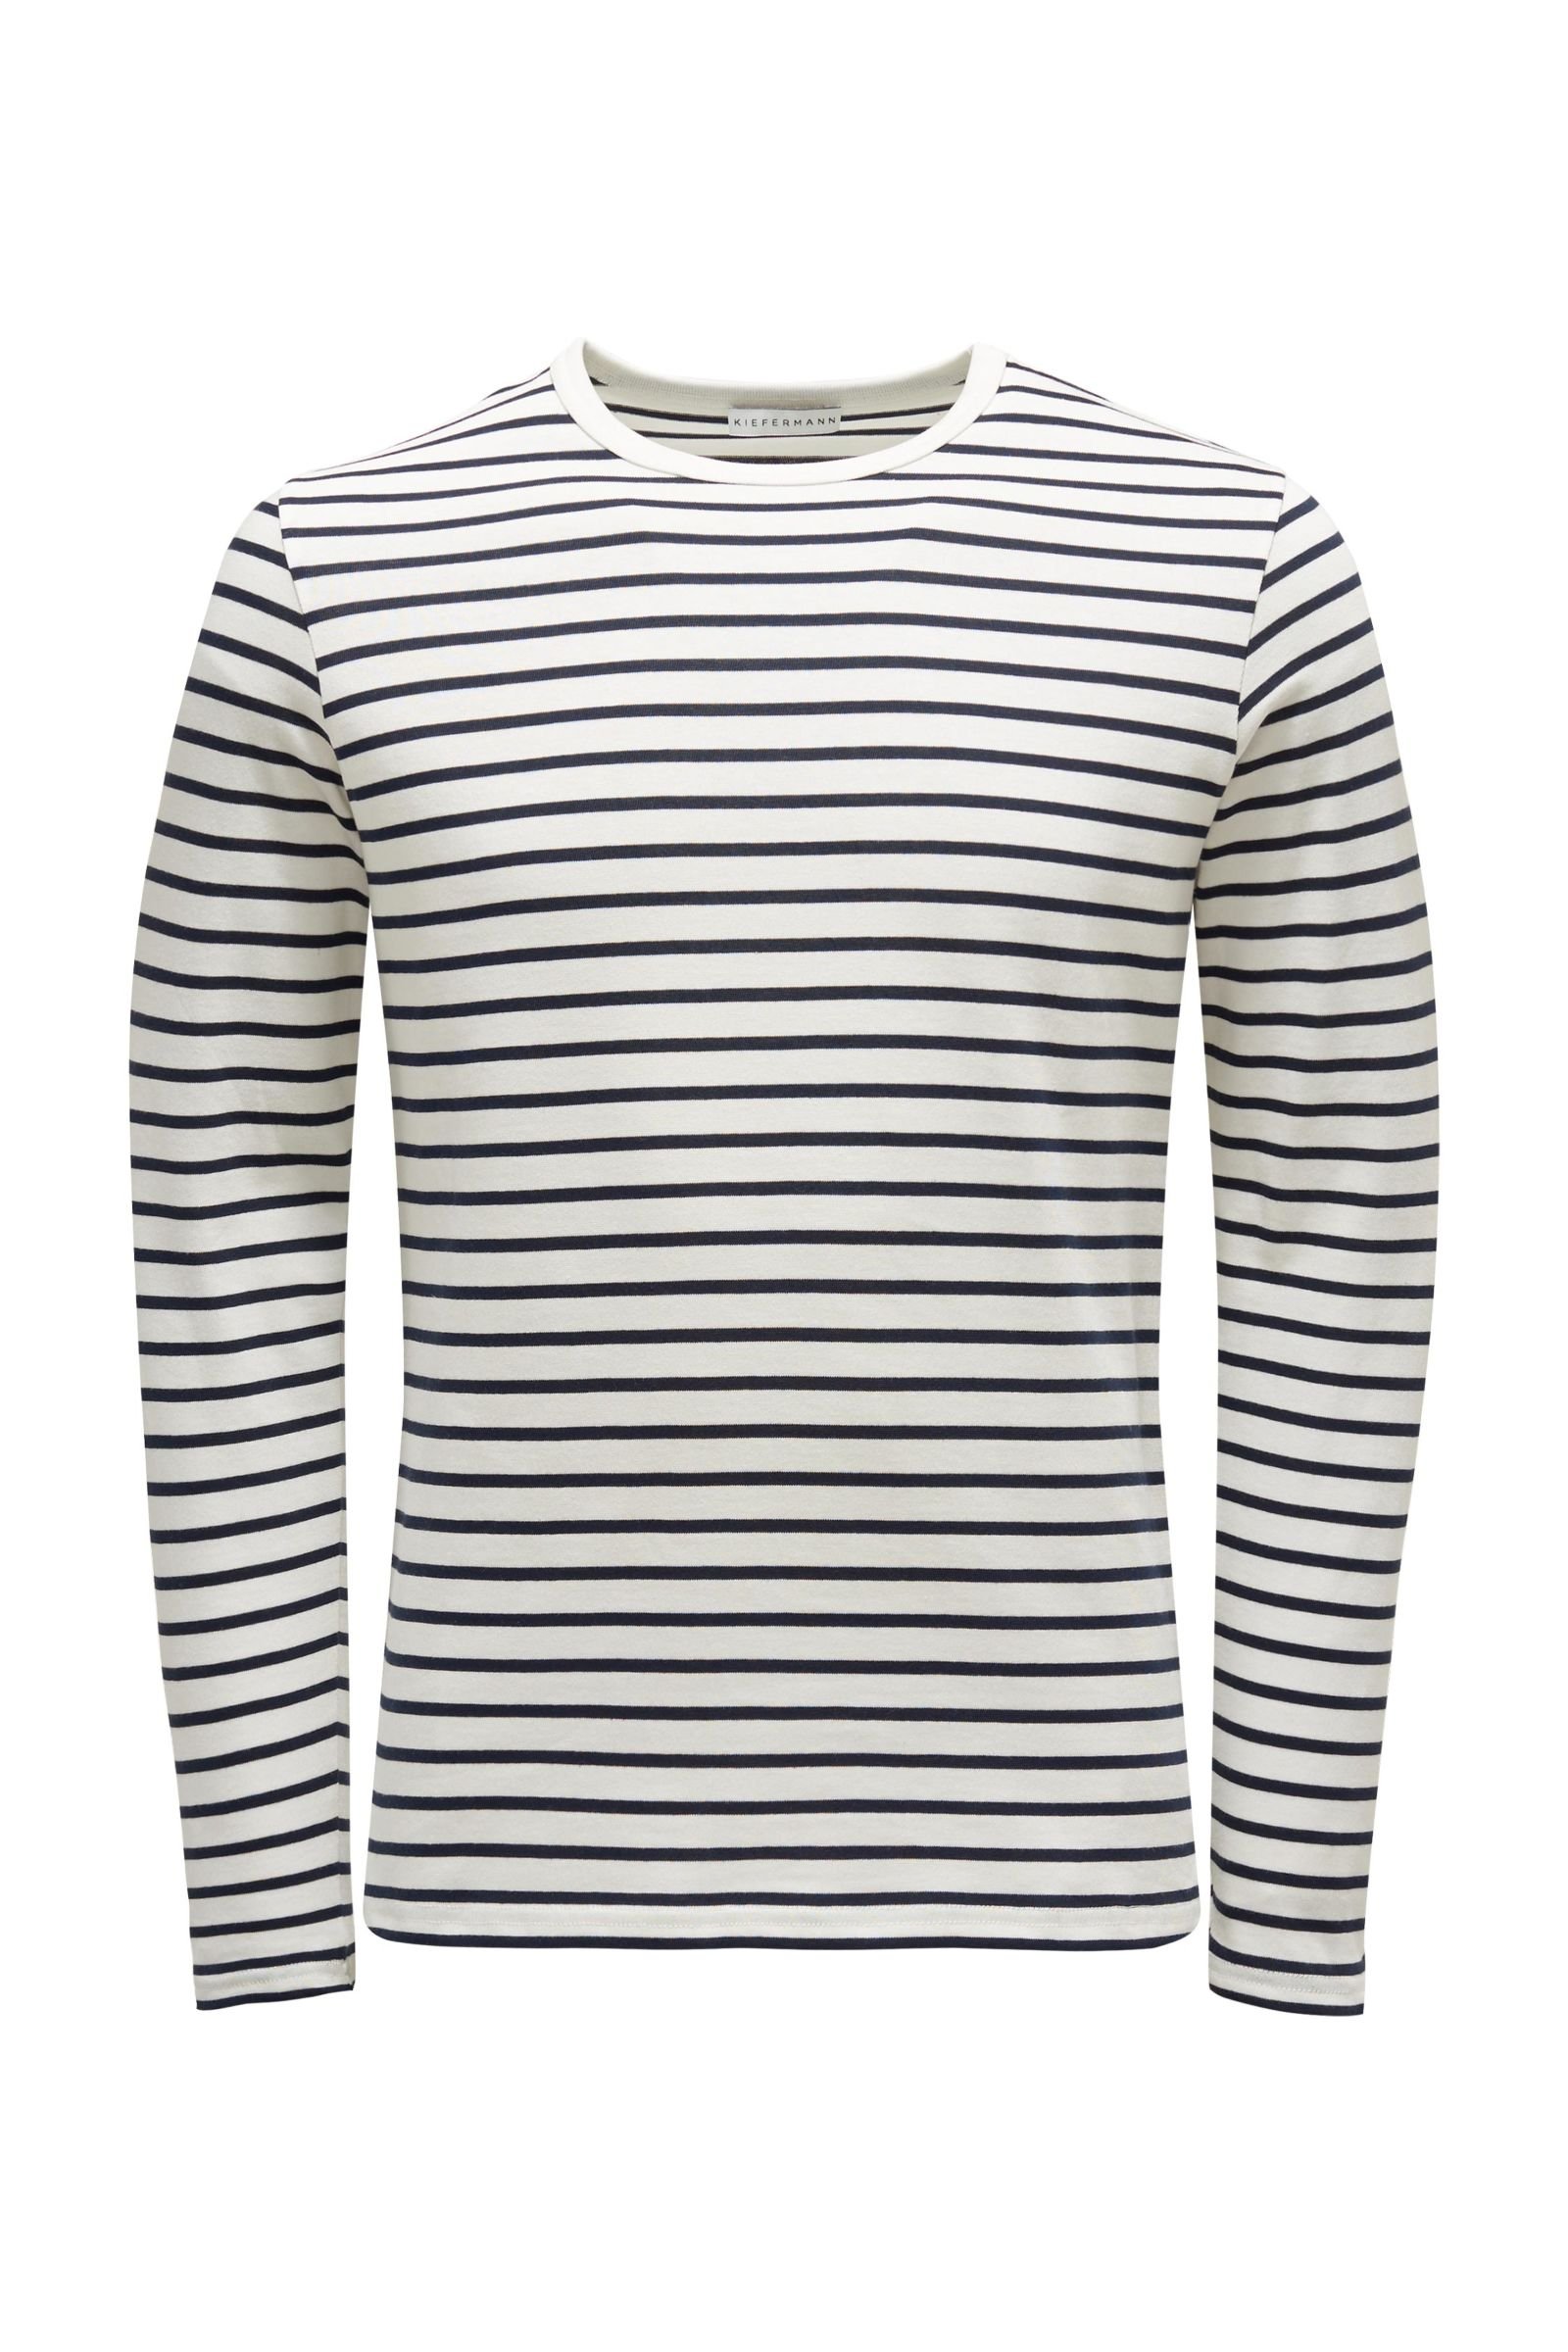 Crew neck long sleeve 'Chuck' off-white/navy striped